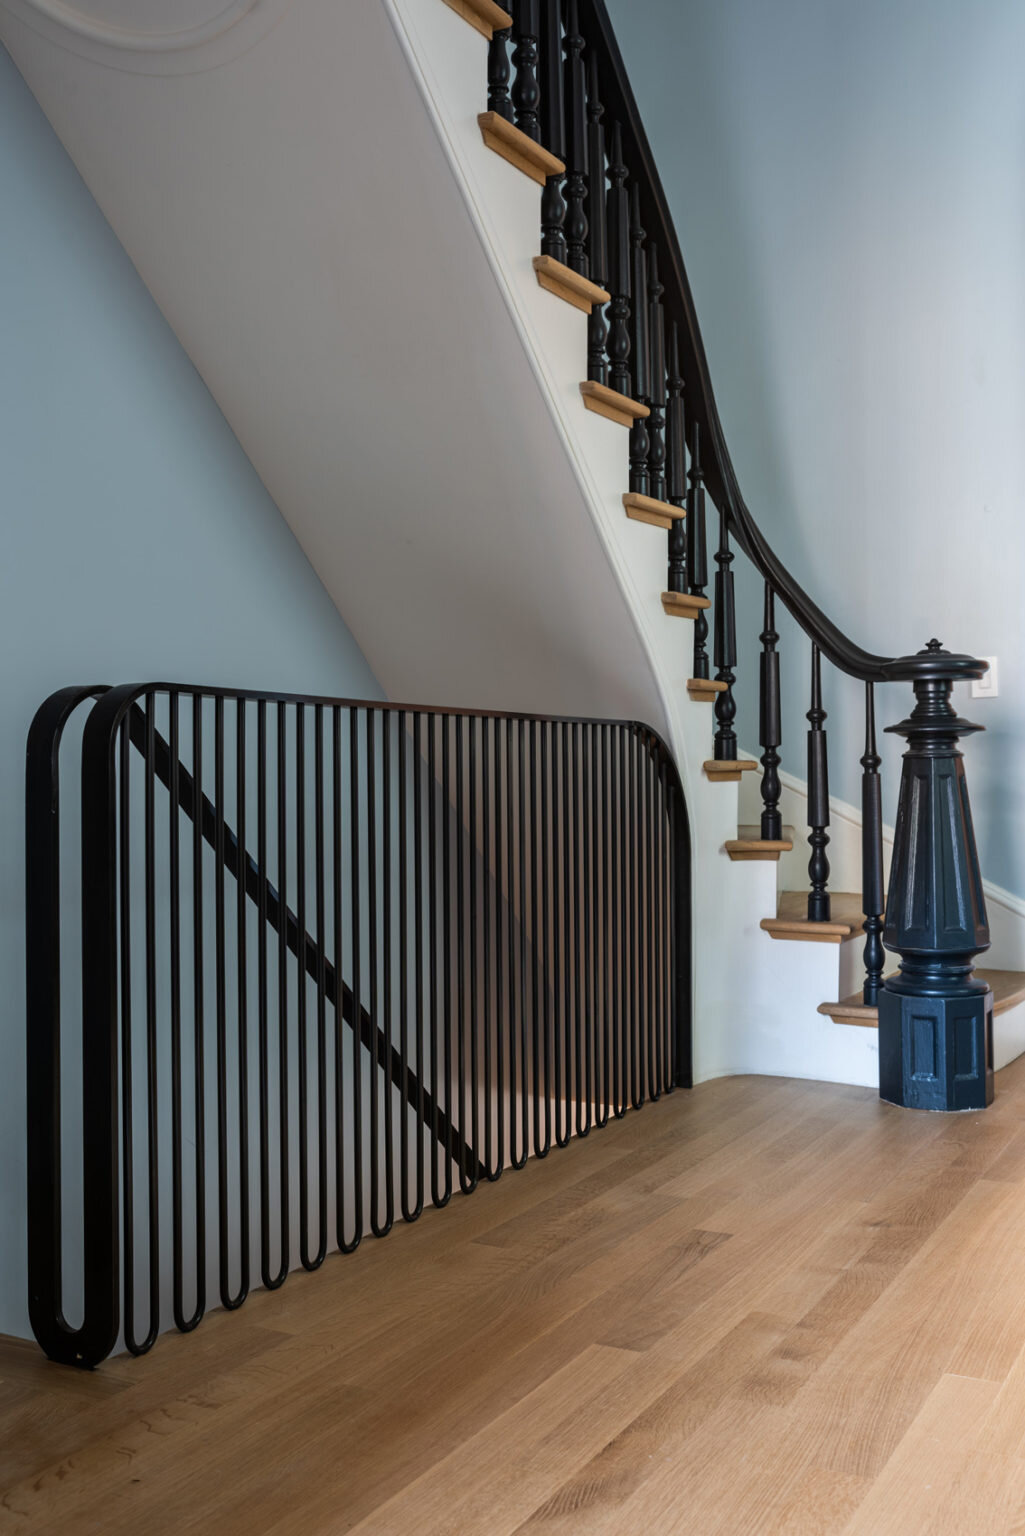  Blackened steel handrail fabricated with Kin and Company, designed by Michael Chen 